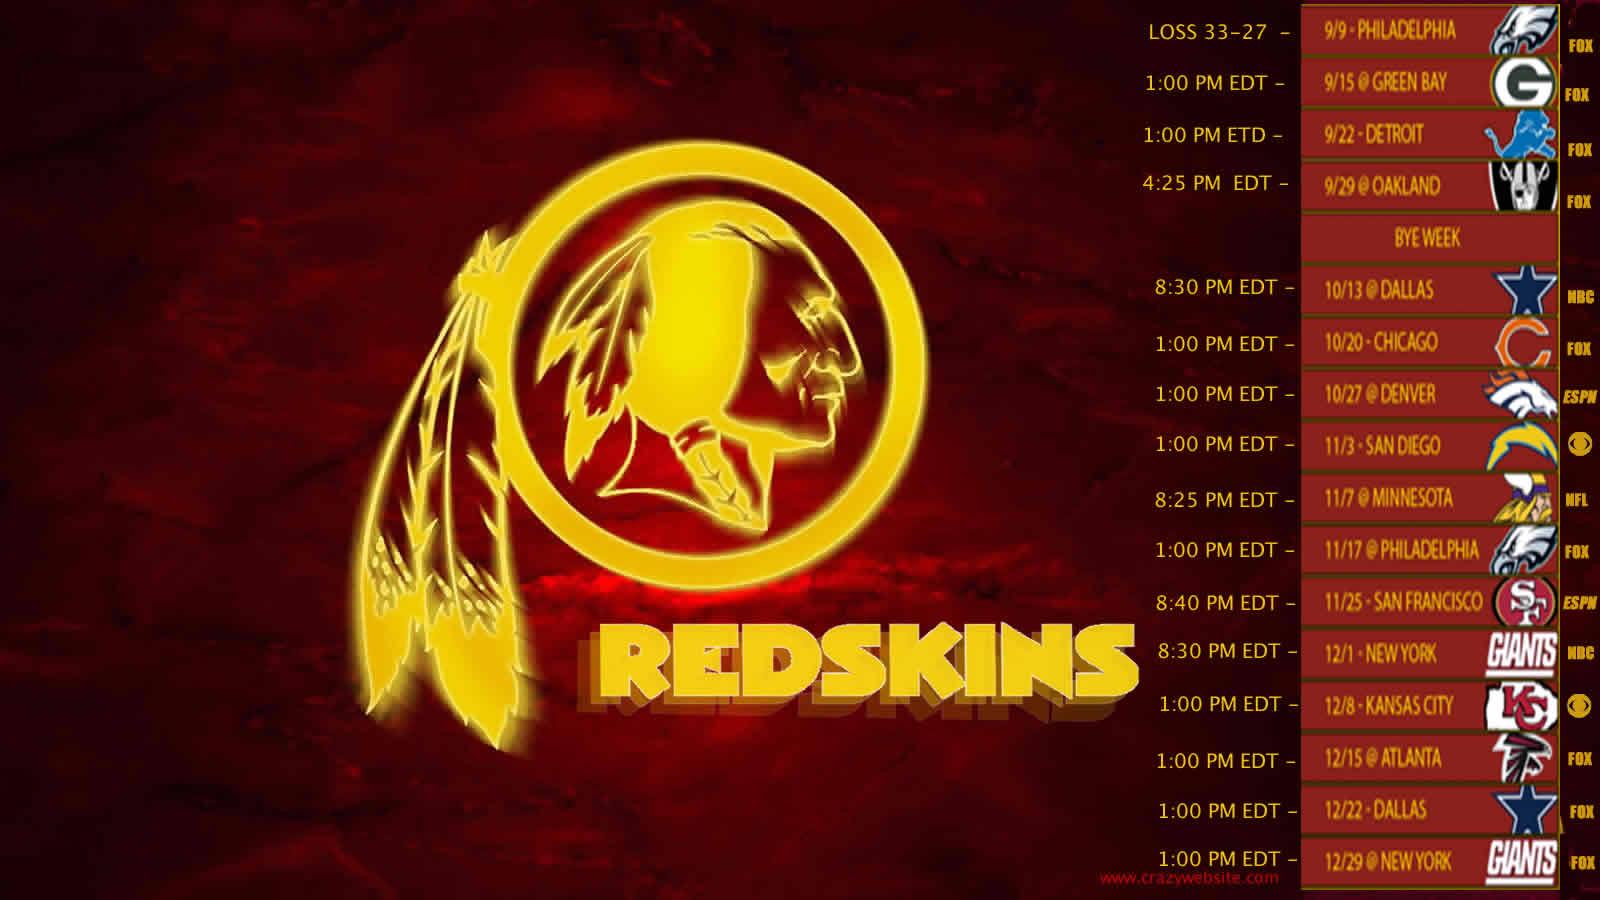 Best of Washington Redskins Wallpaper Full HD Picture 1280×1024